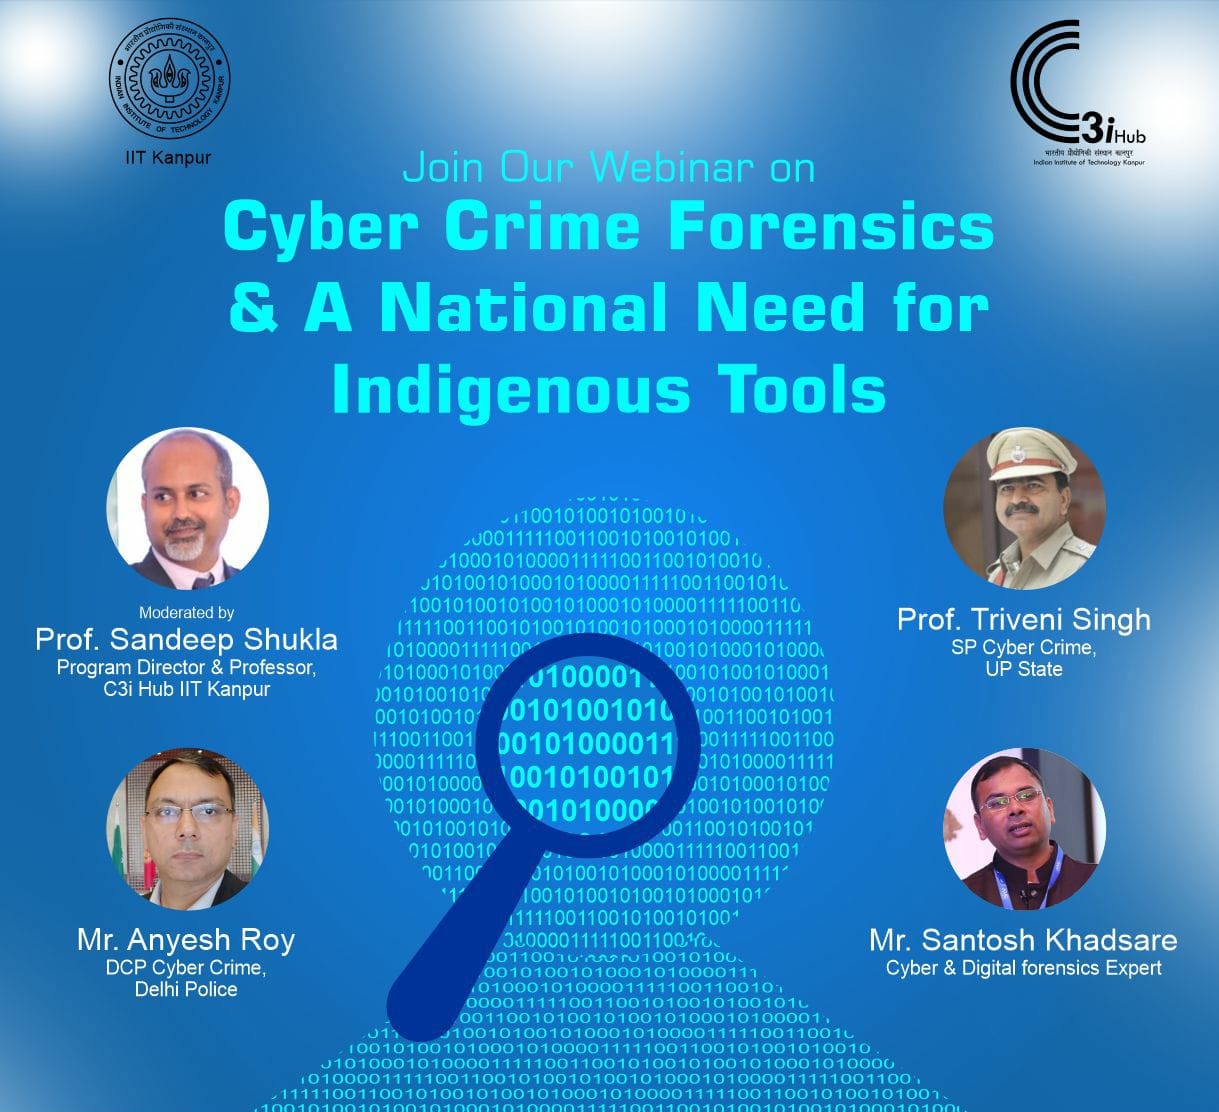 Join Webinar On Cyber Crime Forensics & A National Need for Indigenous Tools By C3iHub-IIT Kanpur